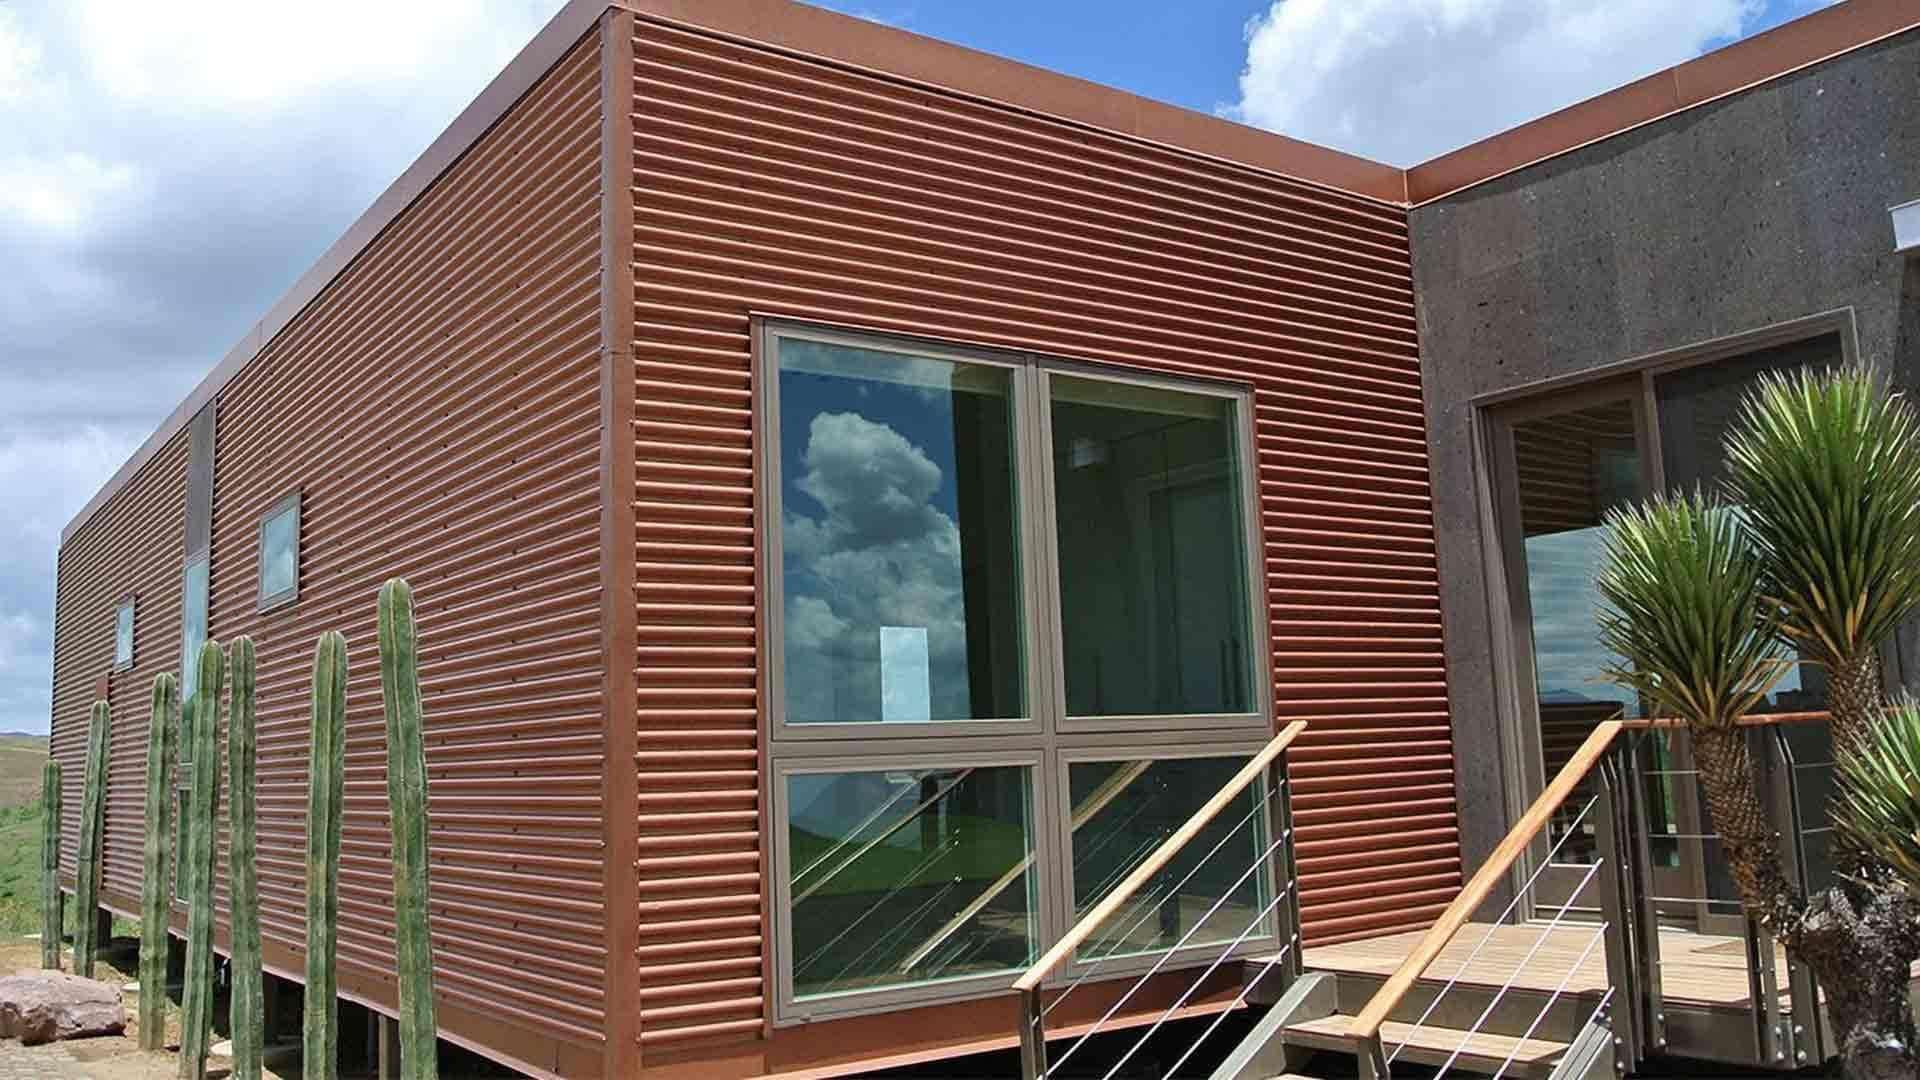 5 Problems With Corrugated Metal Panels